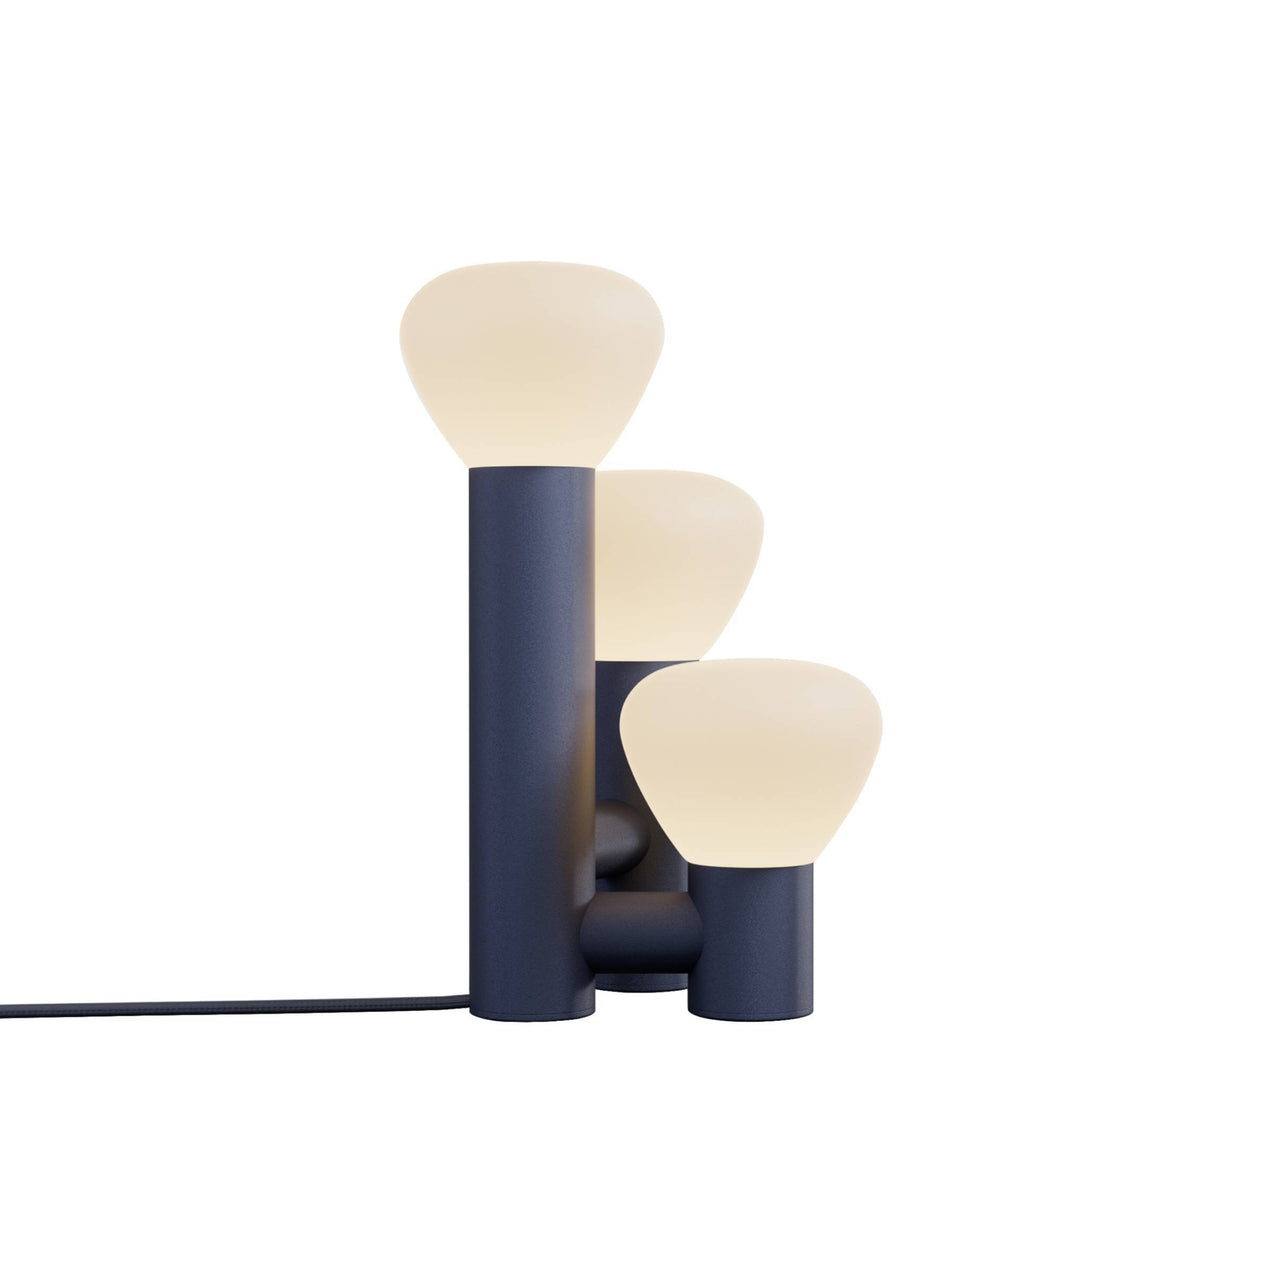 Parc 06 Table Lamp: Footswitch + Midnight Blue + Midnight Blue